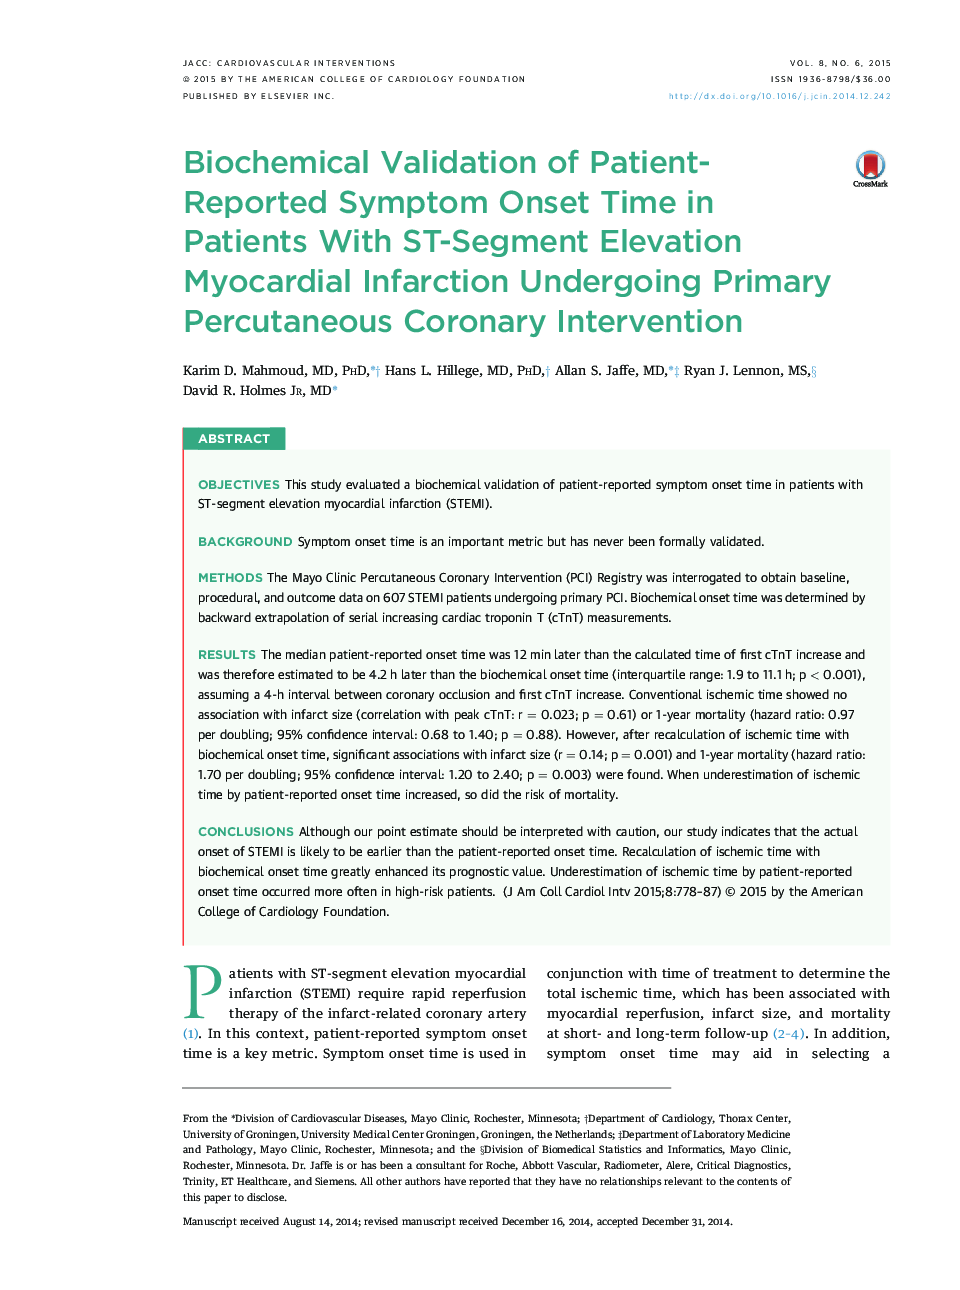 Biochemical Validation of Patient-Reported Symptom Onset Time in PatientsÂ With ST-Segment Elevation Myocardial Infarction Undergoing Primary Percutaneous CoronaryÂ Intervention